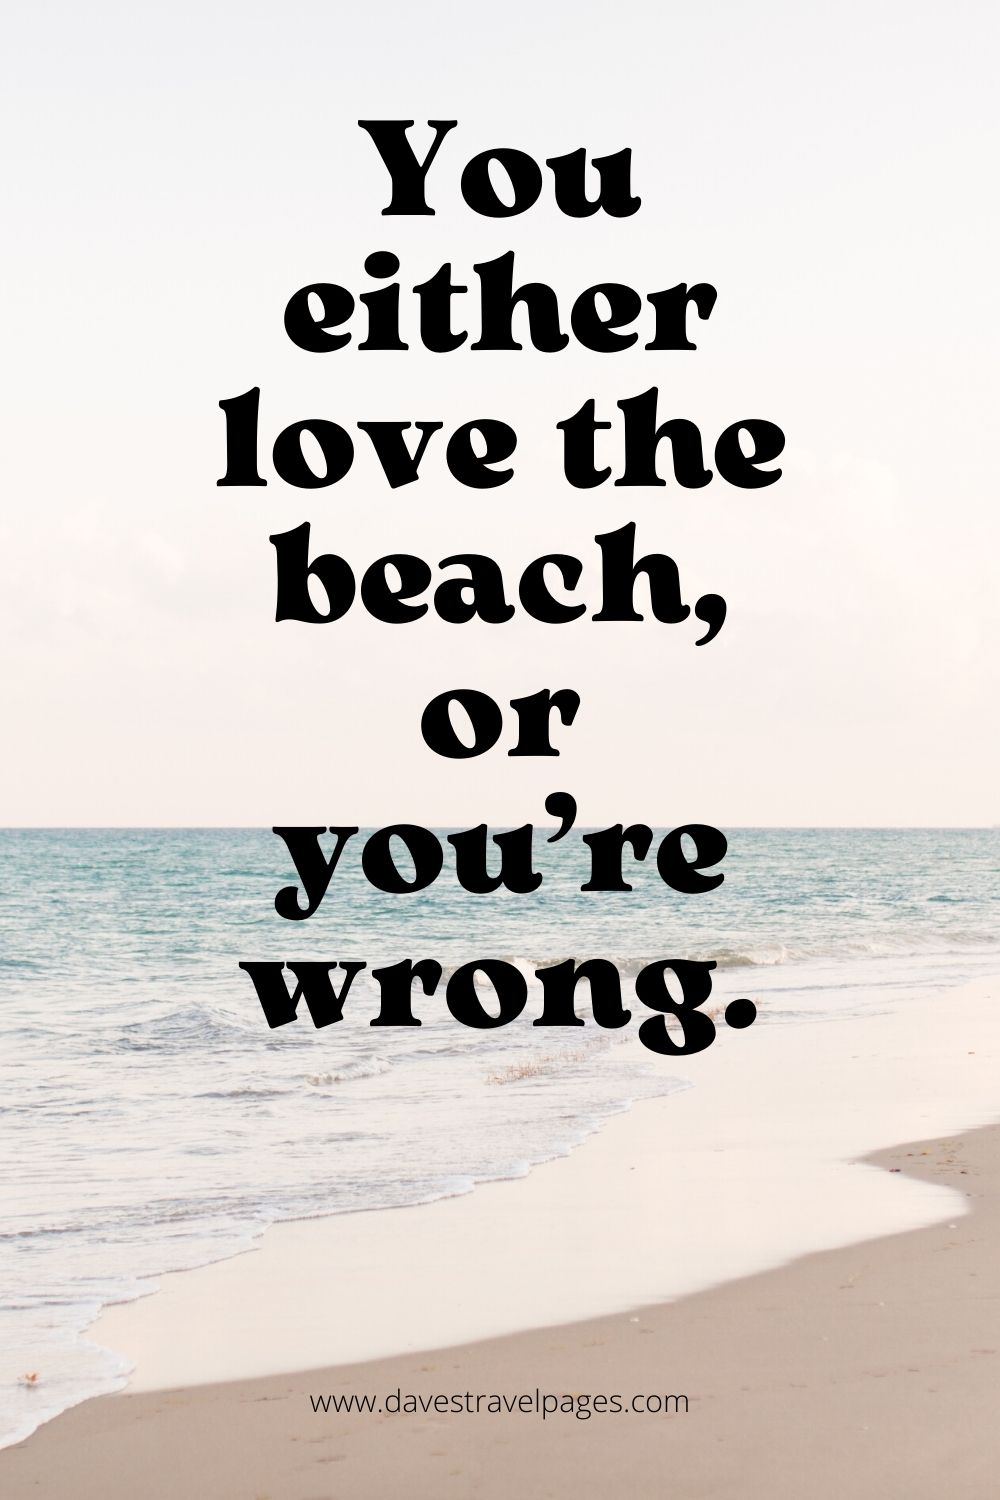 You either love the beach or you're wrong